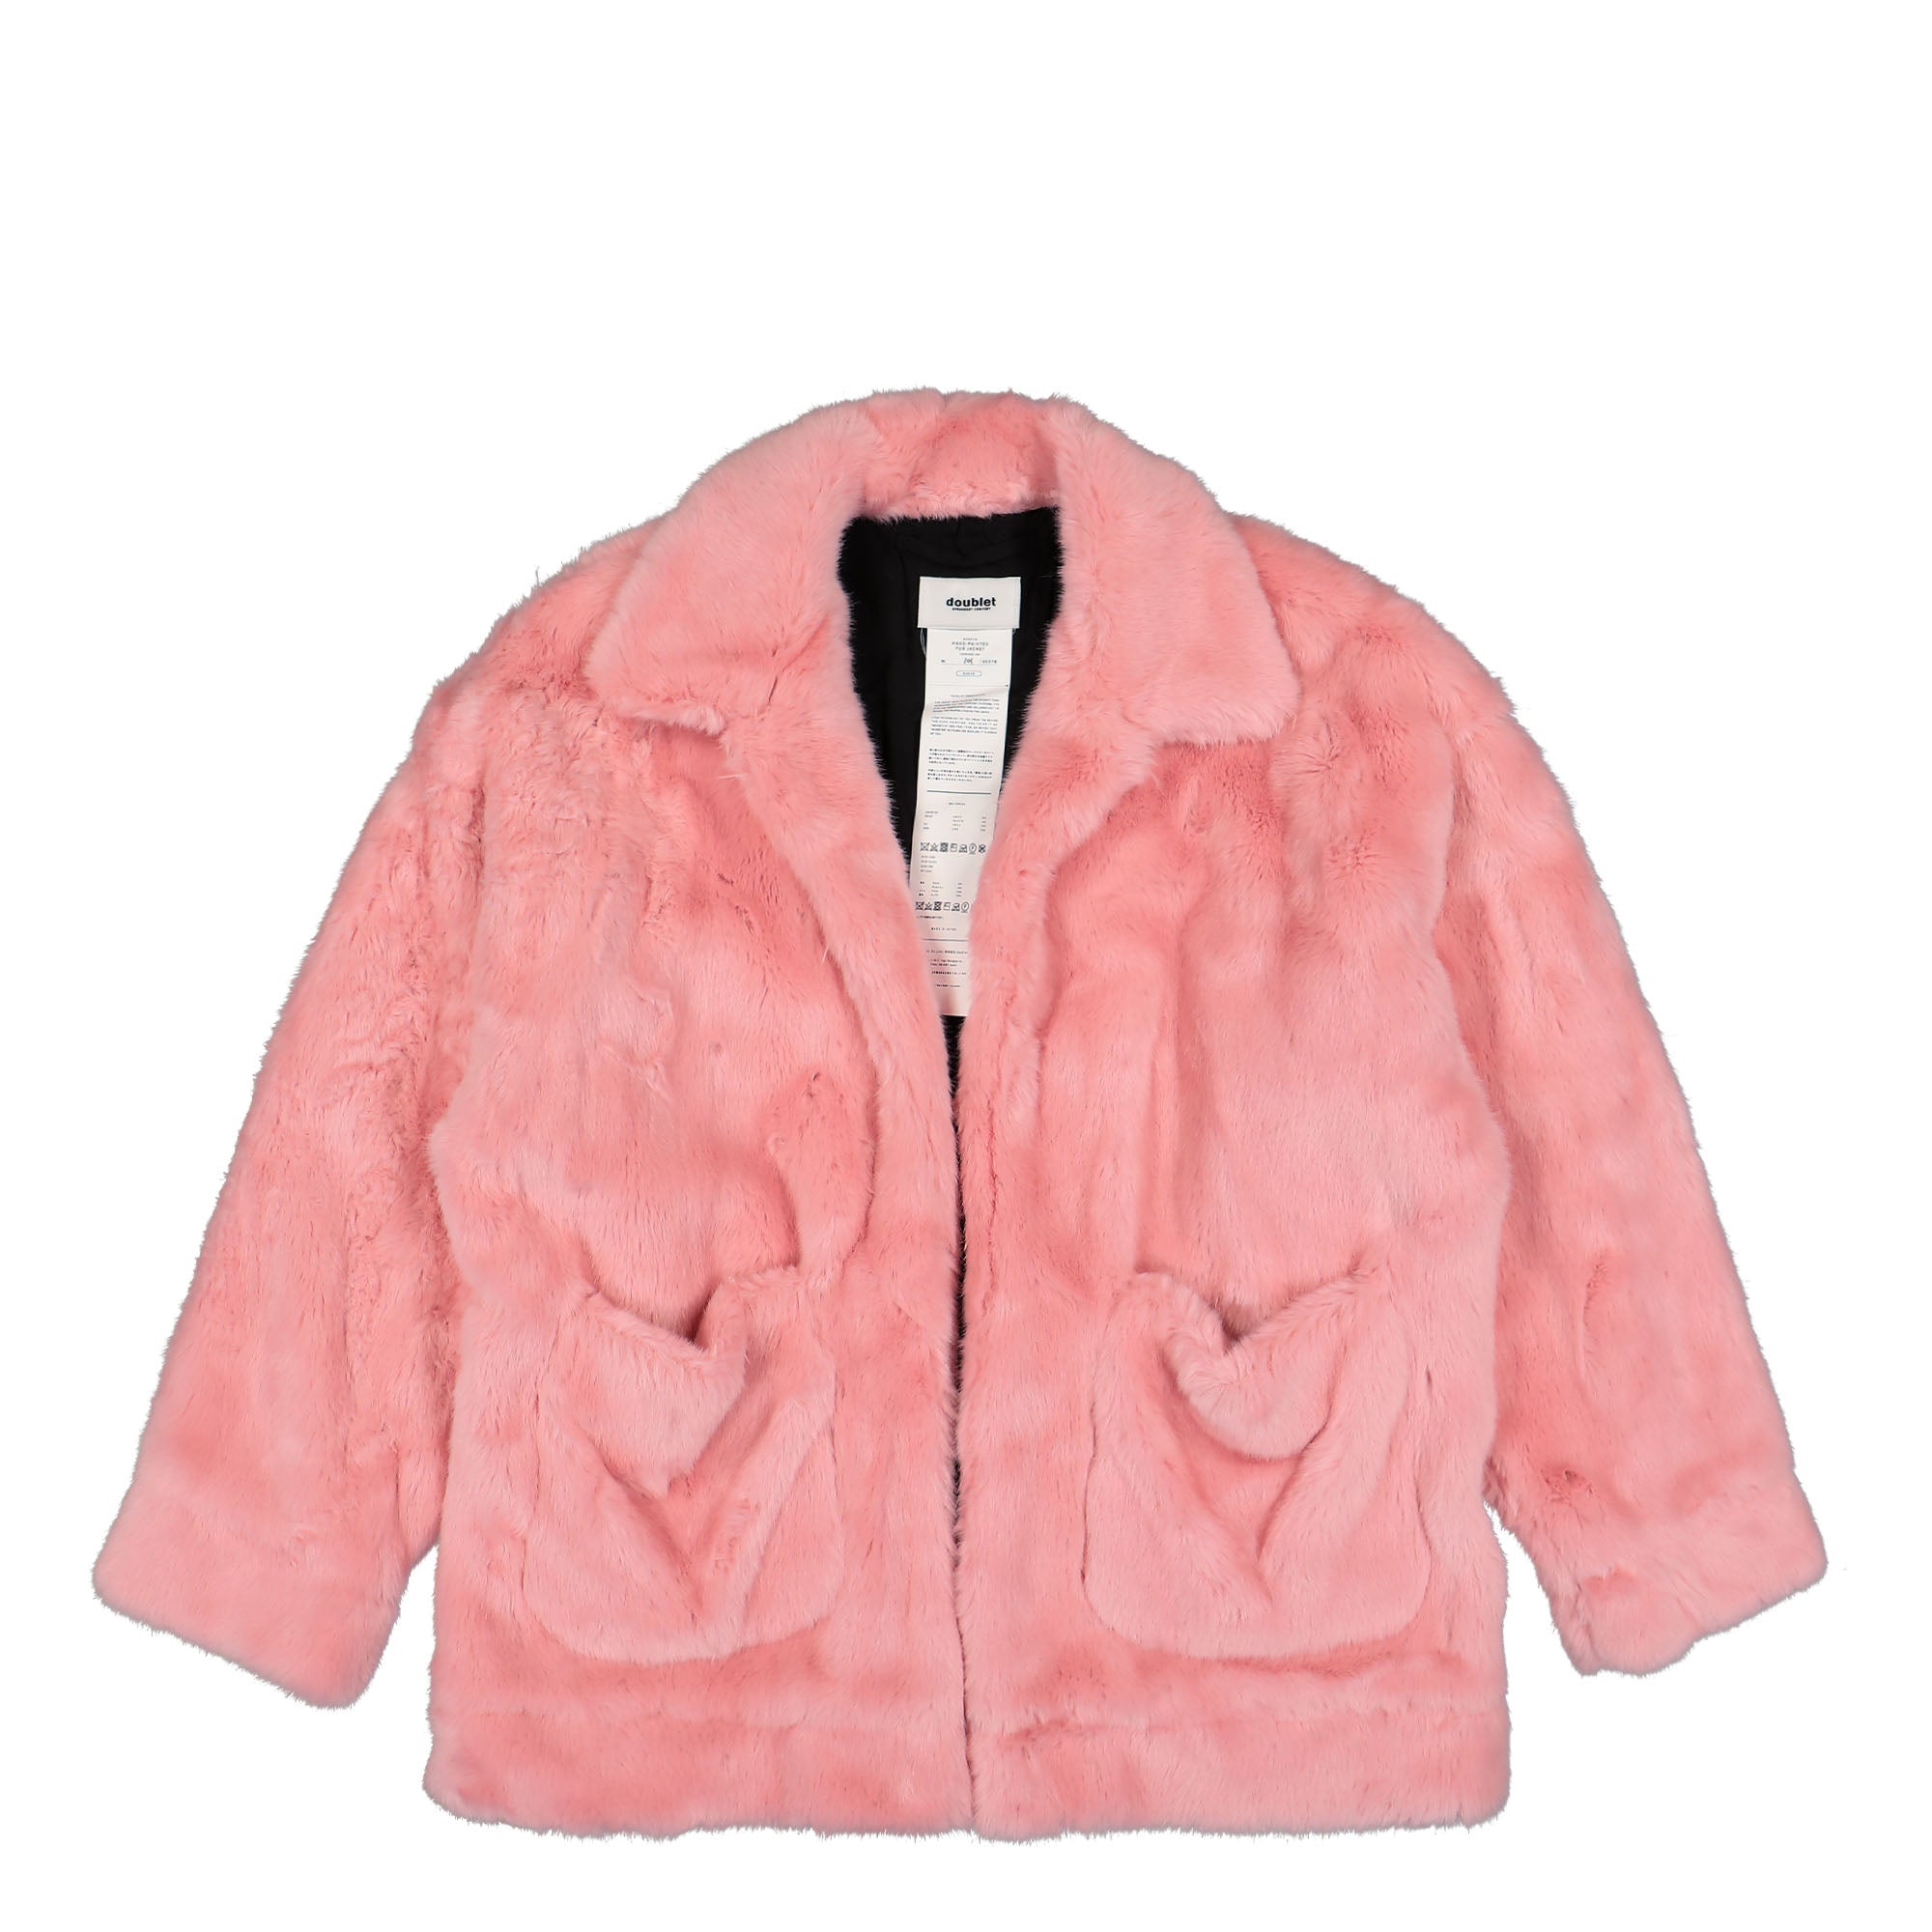 Doublet Hand-Painted Fur Jacket (23AW05BL168) | GATE